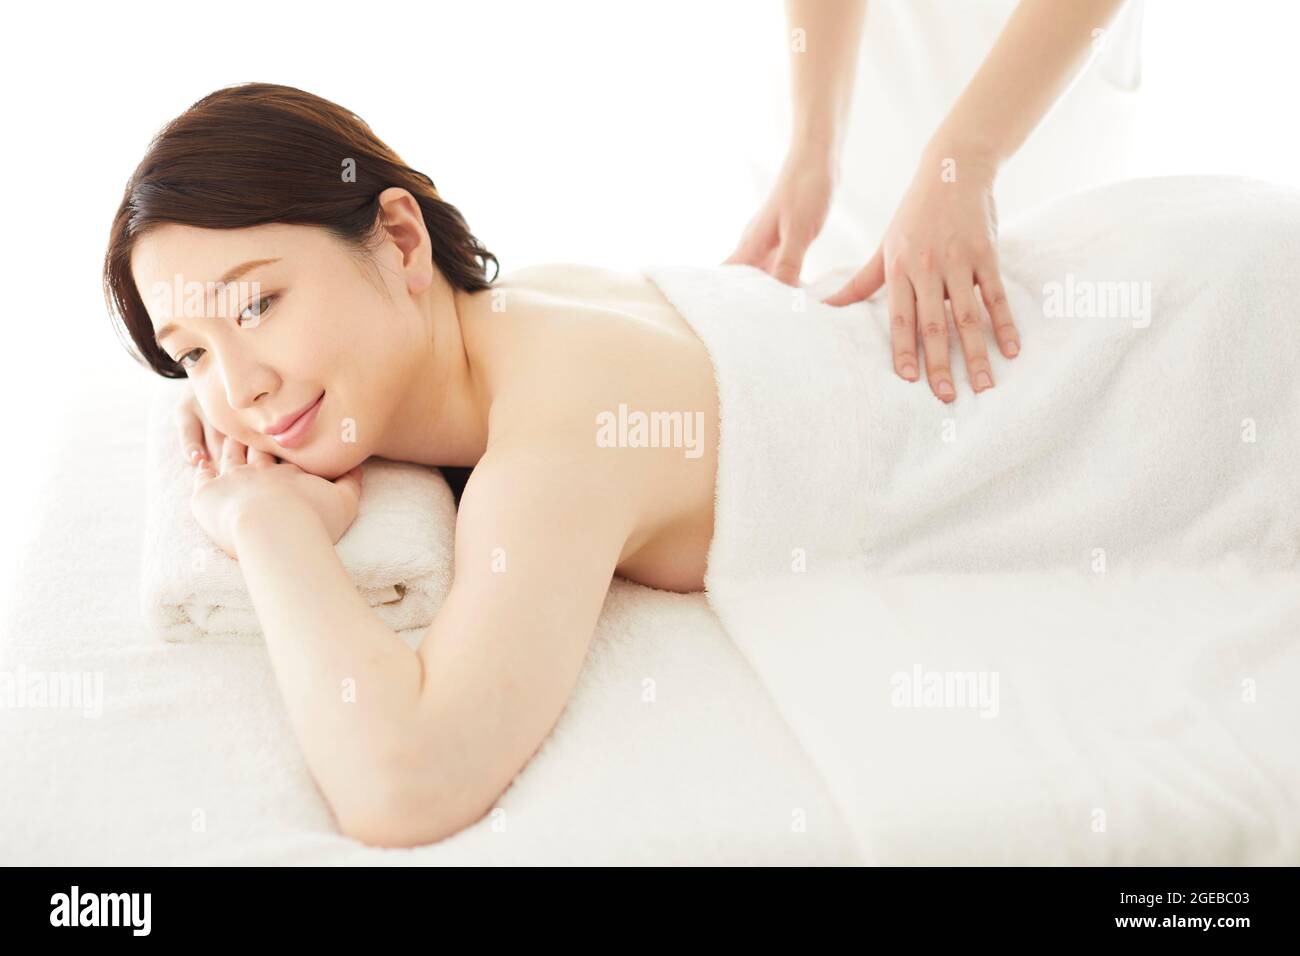 Japanese woman relaxing at a spa Stock Photo